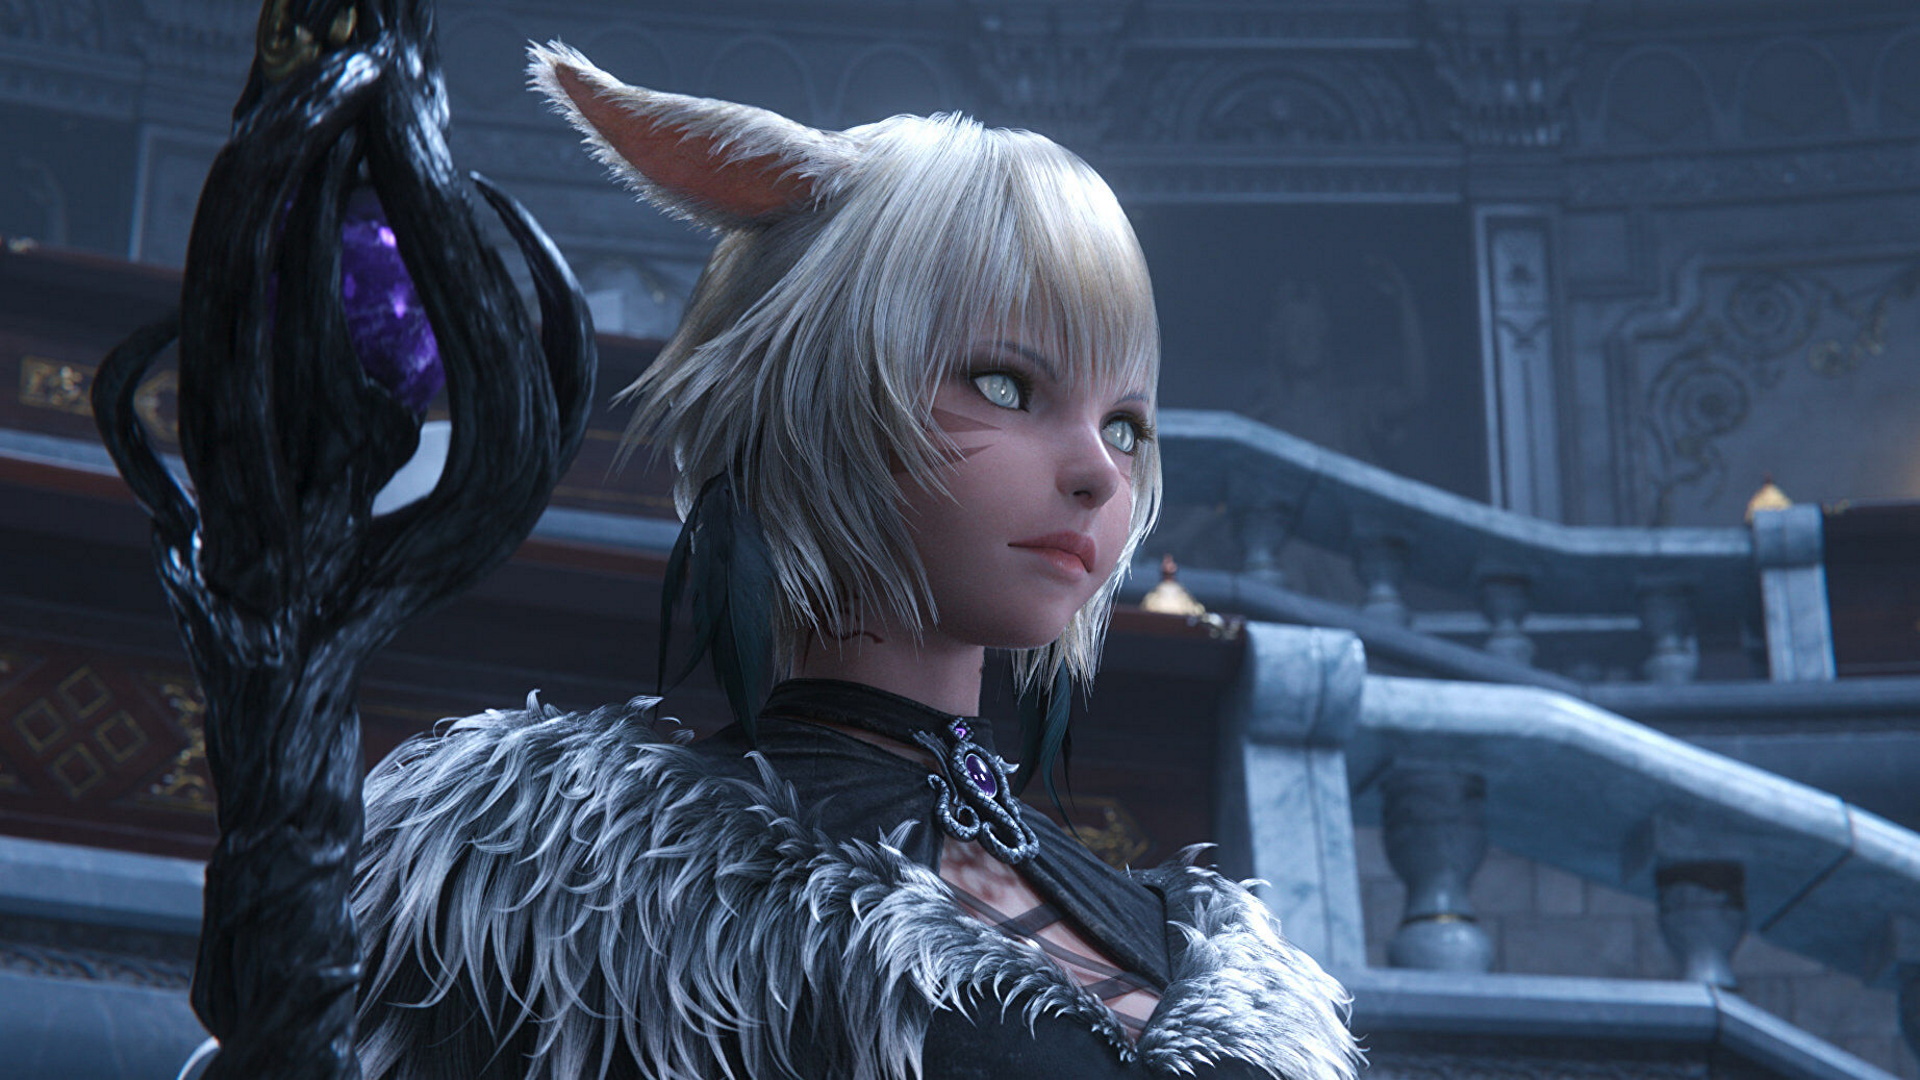 Square Enix offering free login campaign for inactive players in